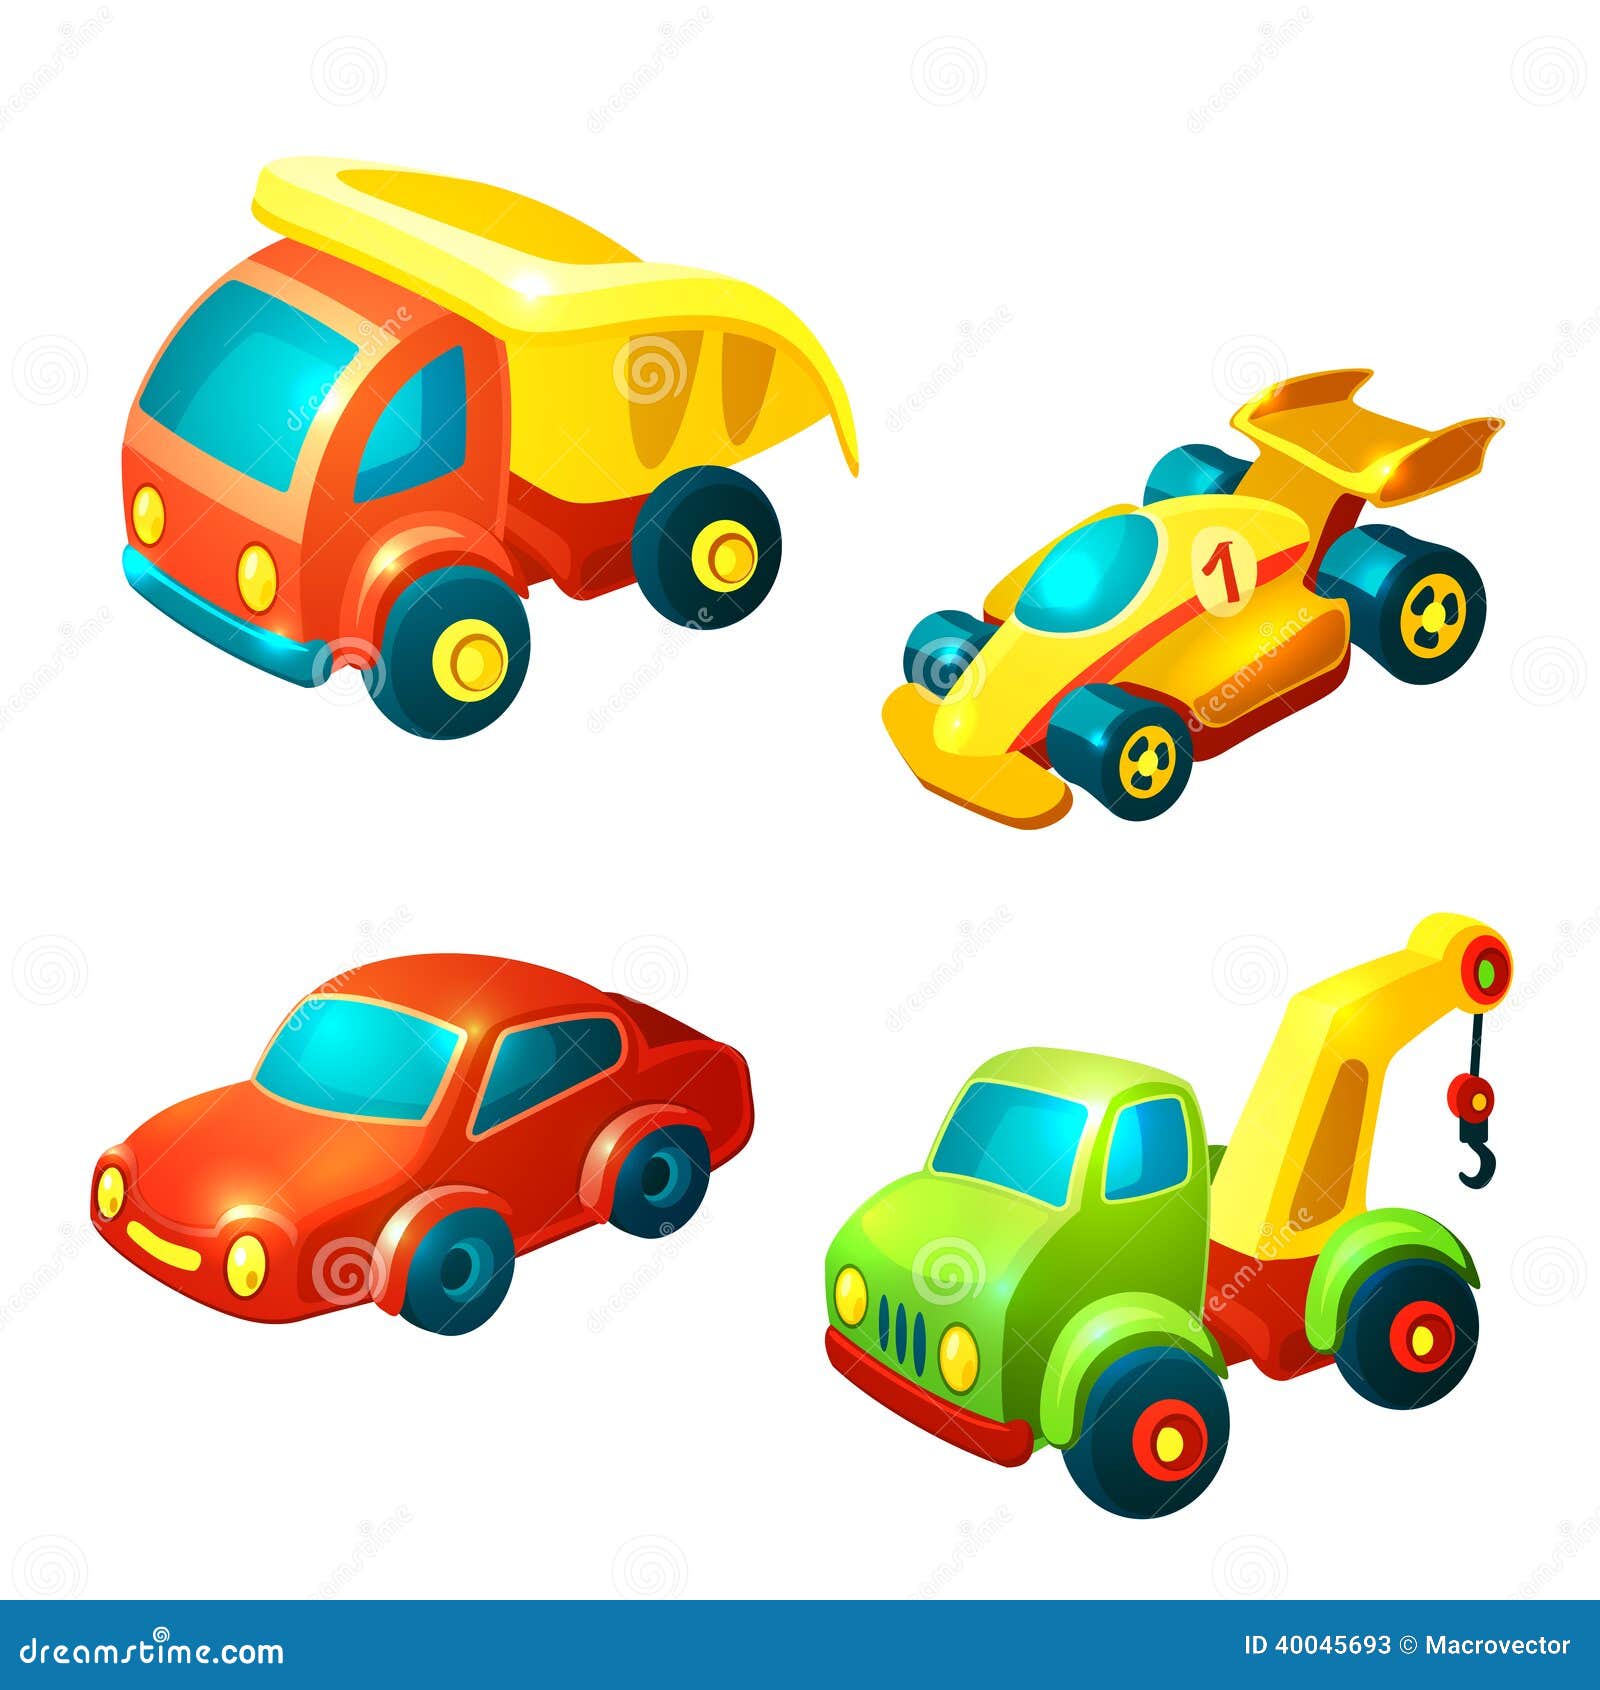 mr clipart car'n truck collection - photo #6